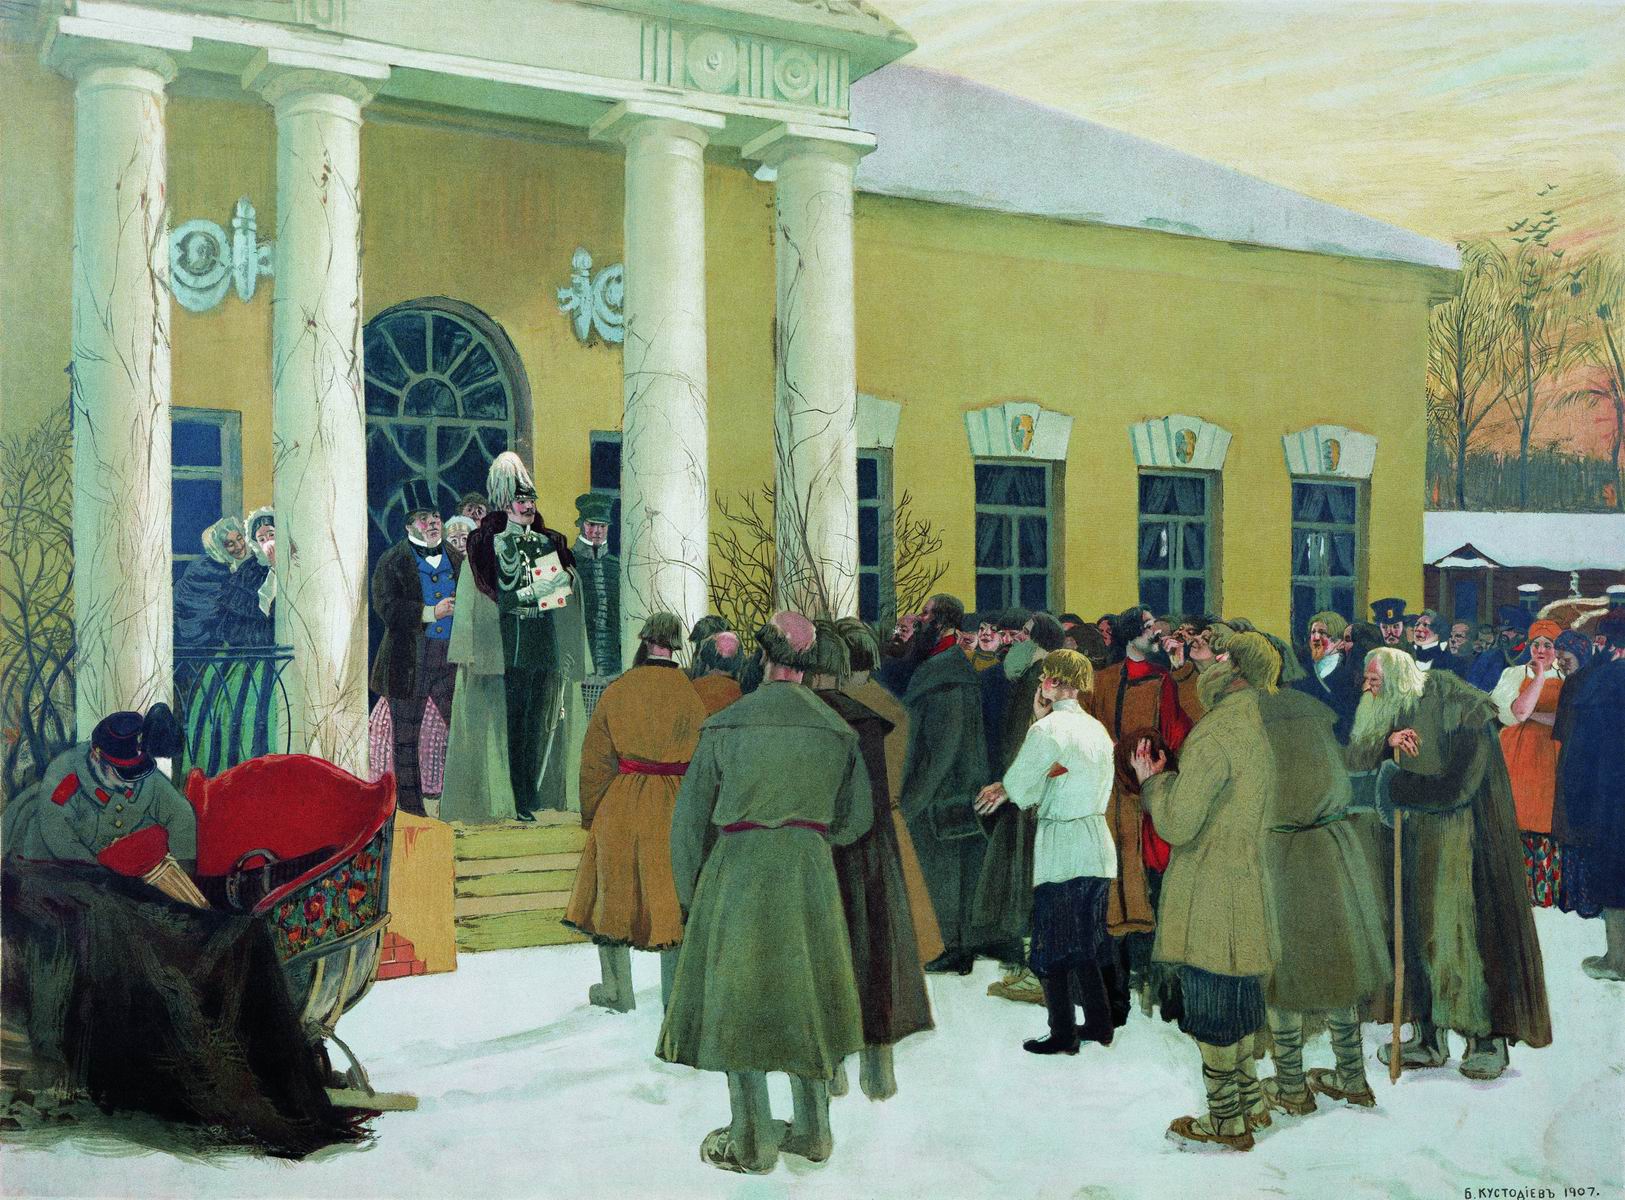 A 1907 painting by Boris Kustodiev depicting Russian serfs listening to the proclamation of the Emancipation Manifesto in 1861. Credits to: Art-Catalogue.ru (Public Domain)